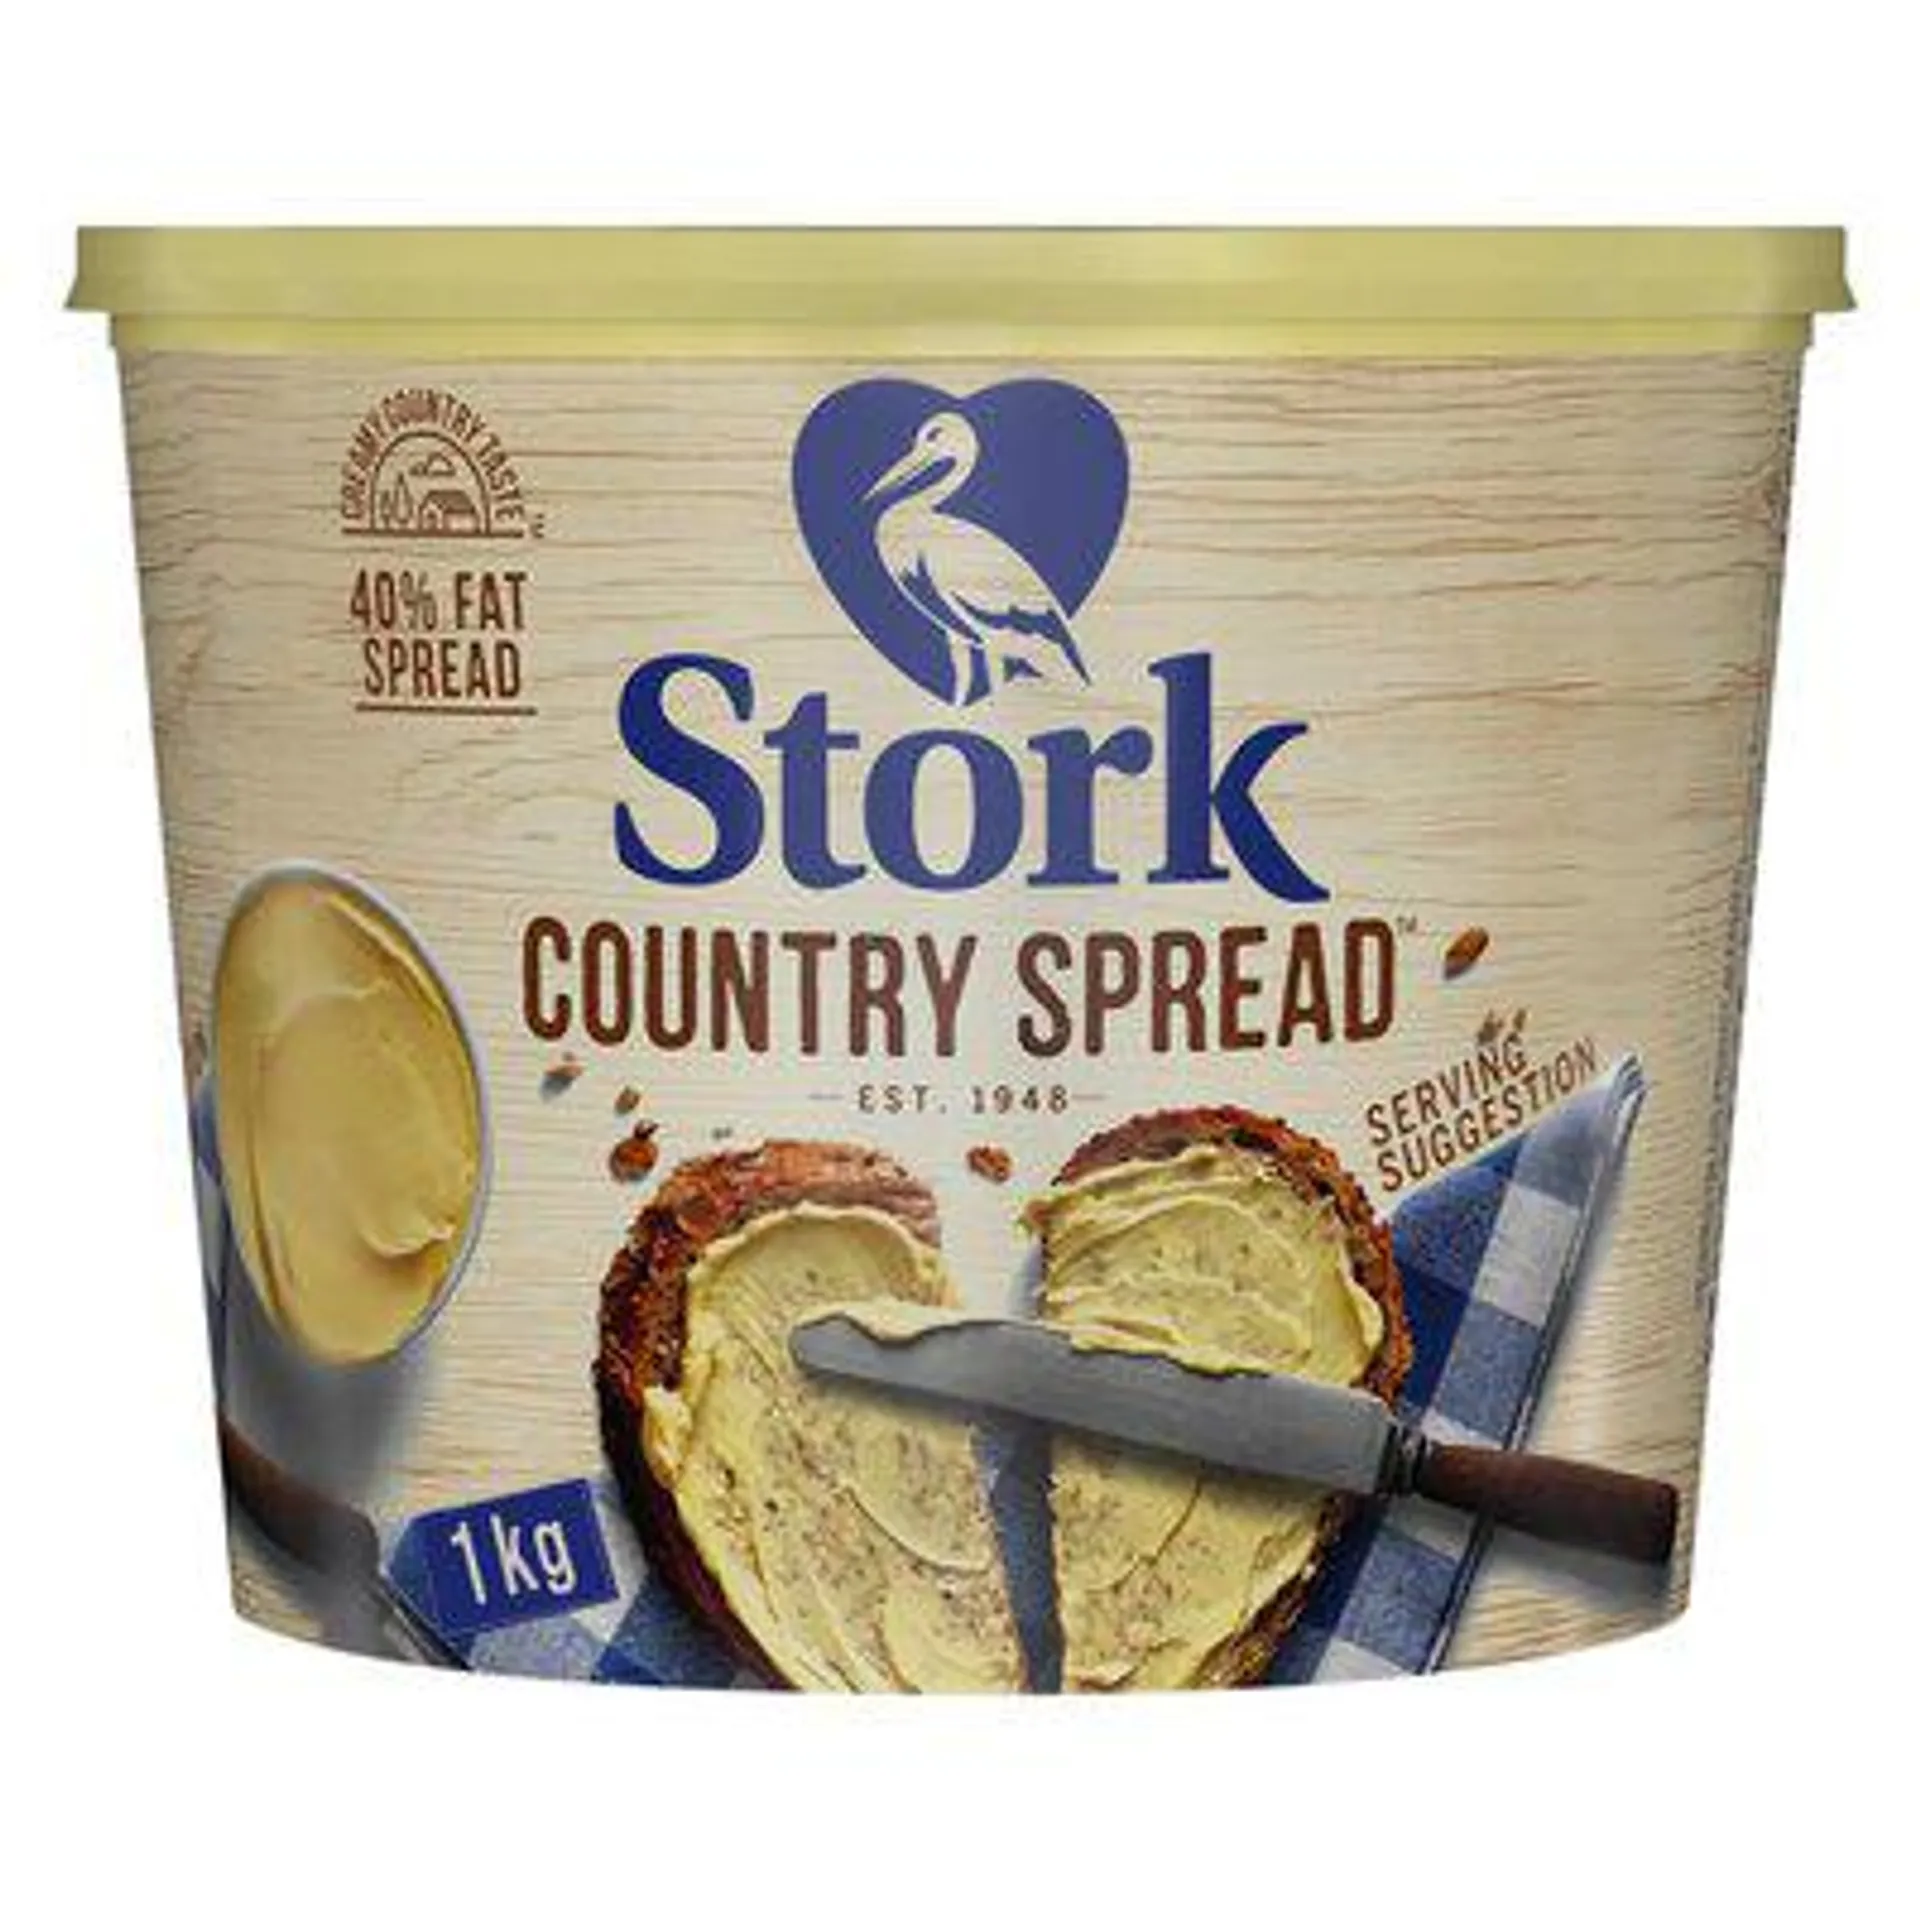 Stork Country 40% Fat Spread 1kg